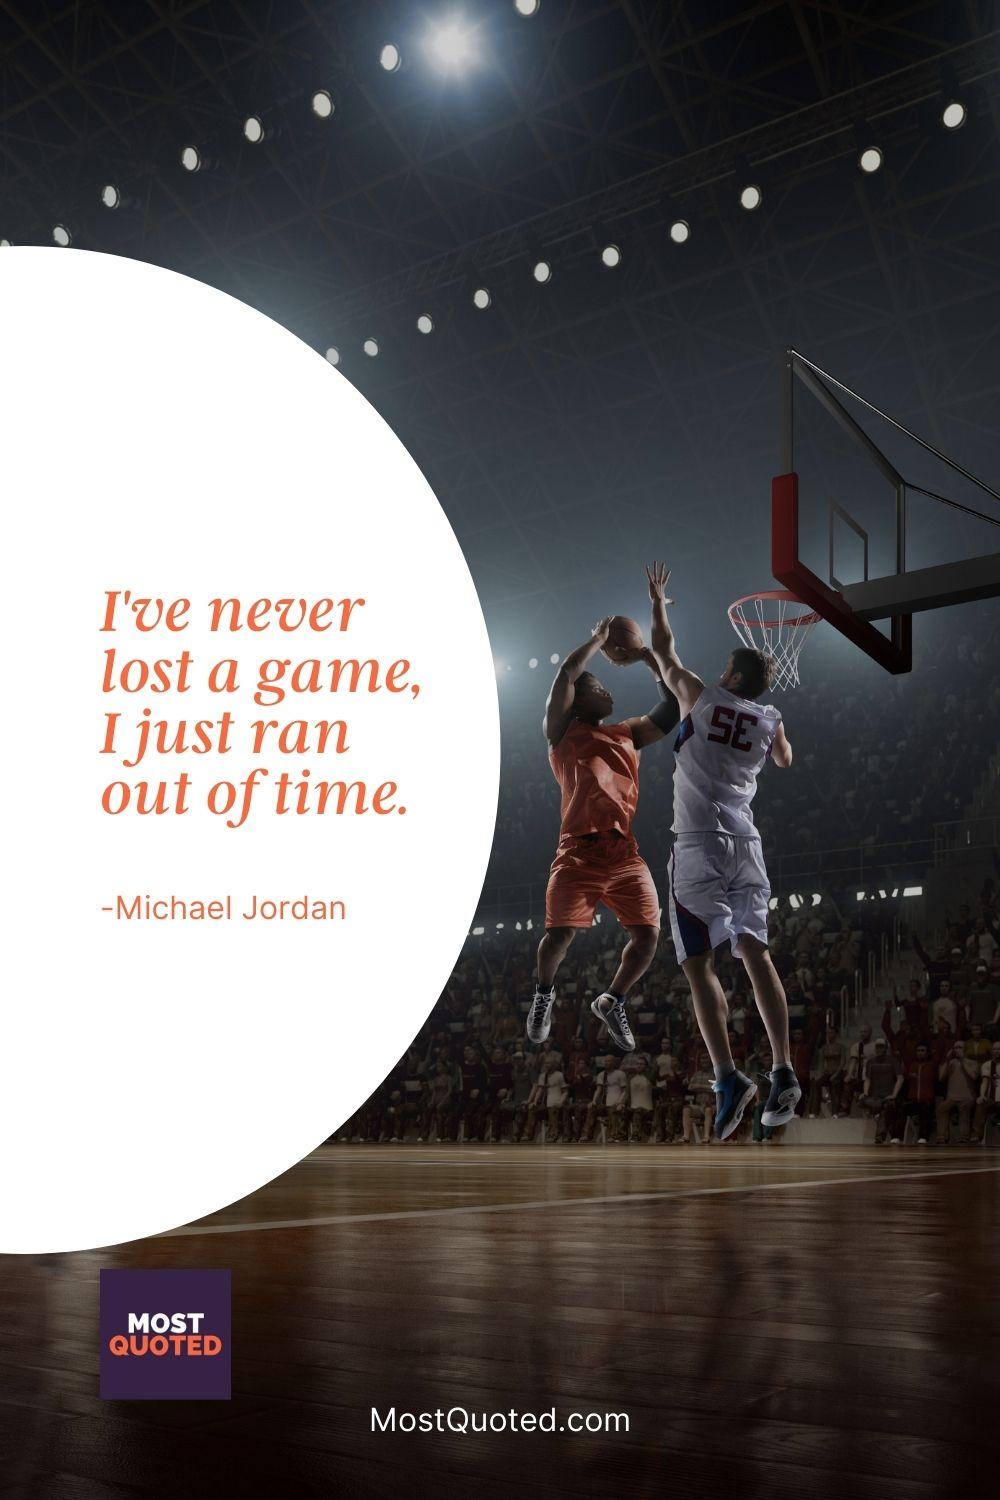 I’ve never lost a game, I just ran out of time. - Michael Jordan